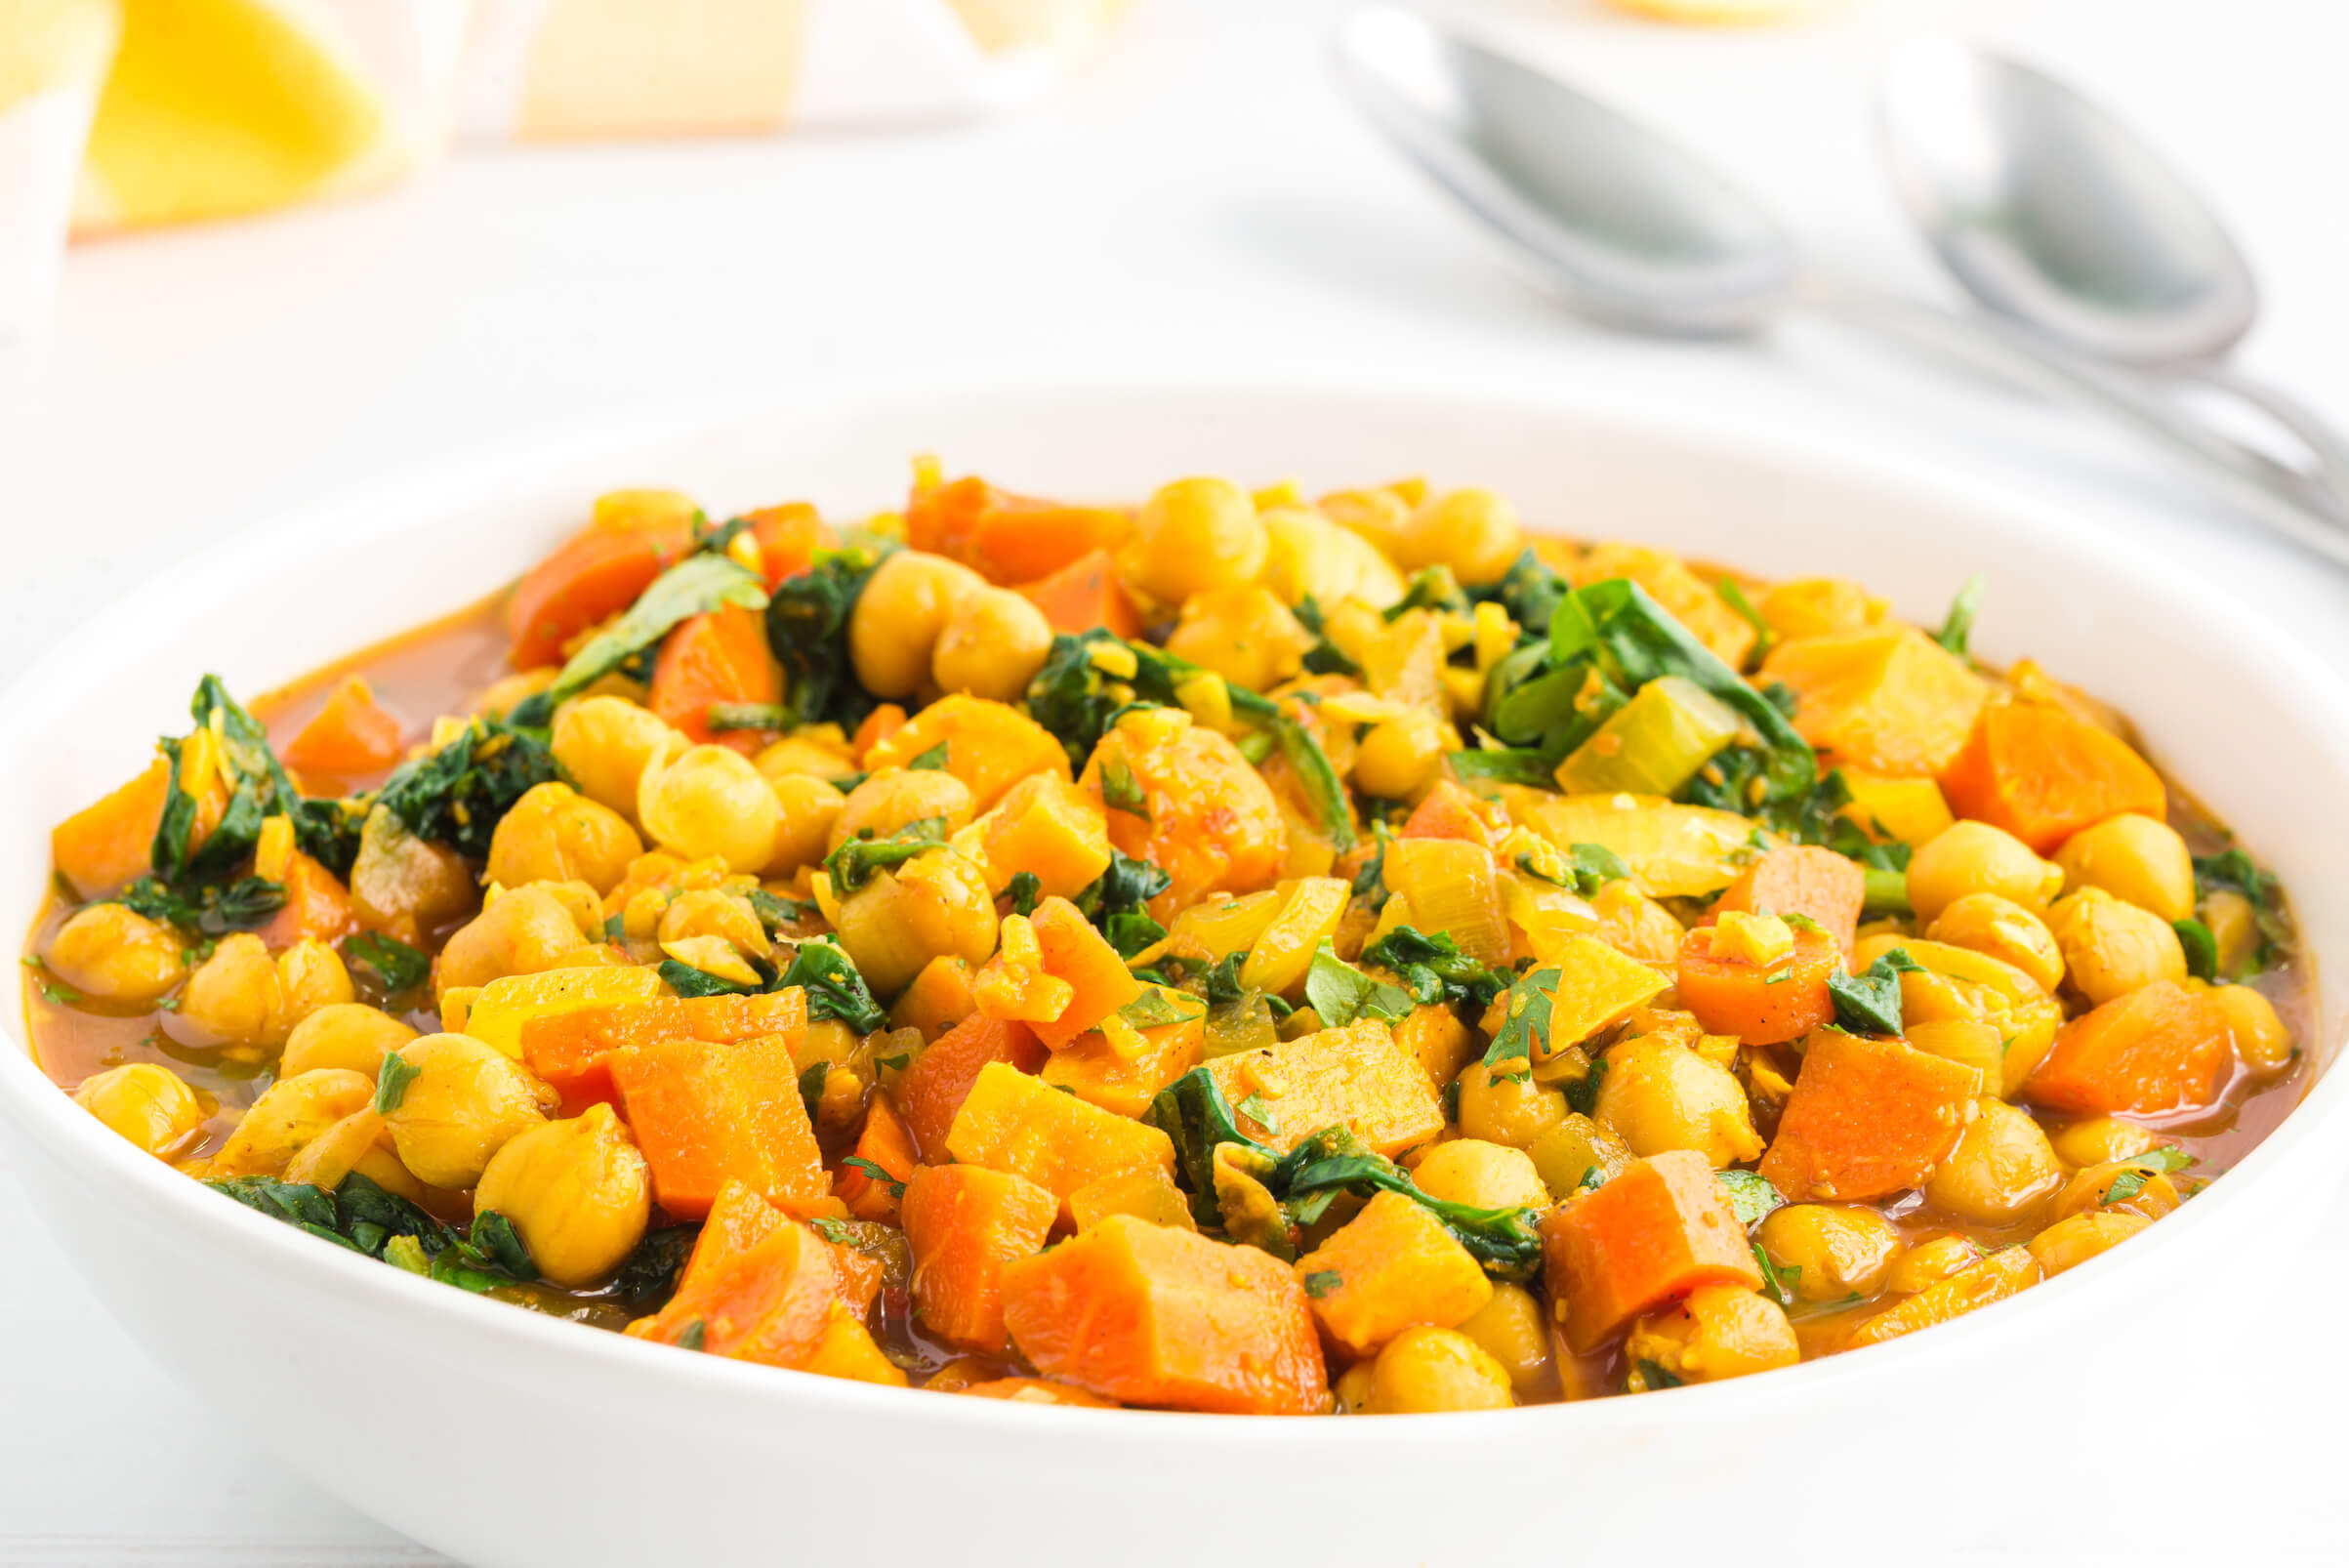 Moroccan Spiced Sweet Potato, Chickpea, and Spinach Stew